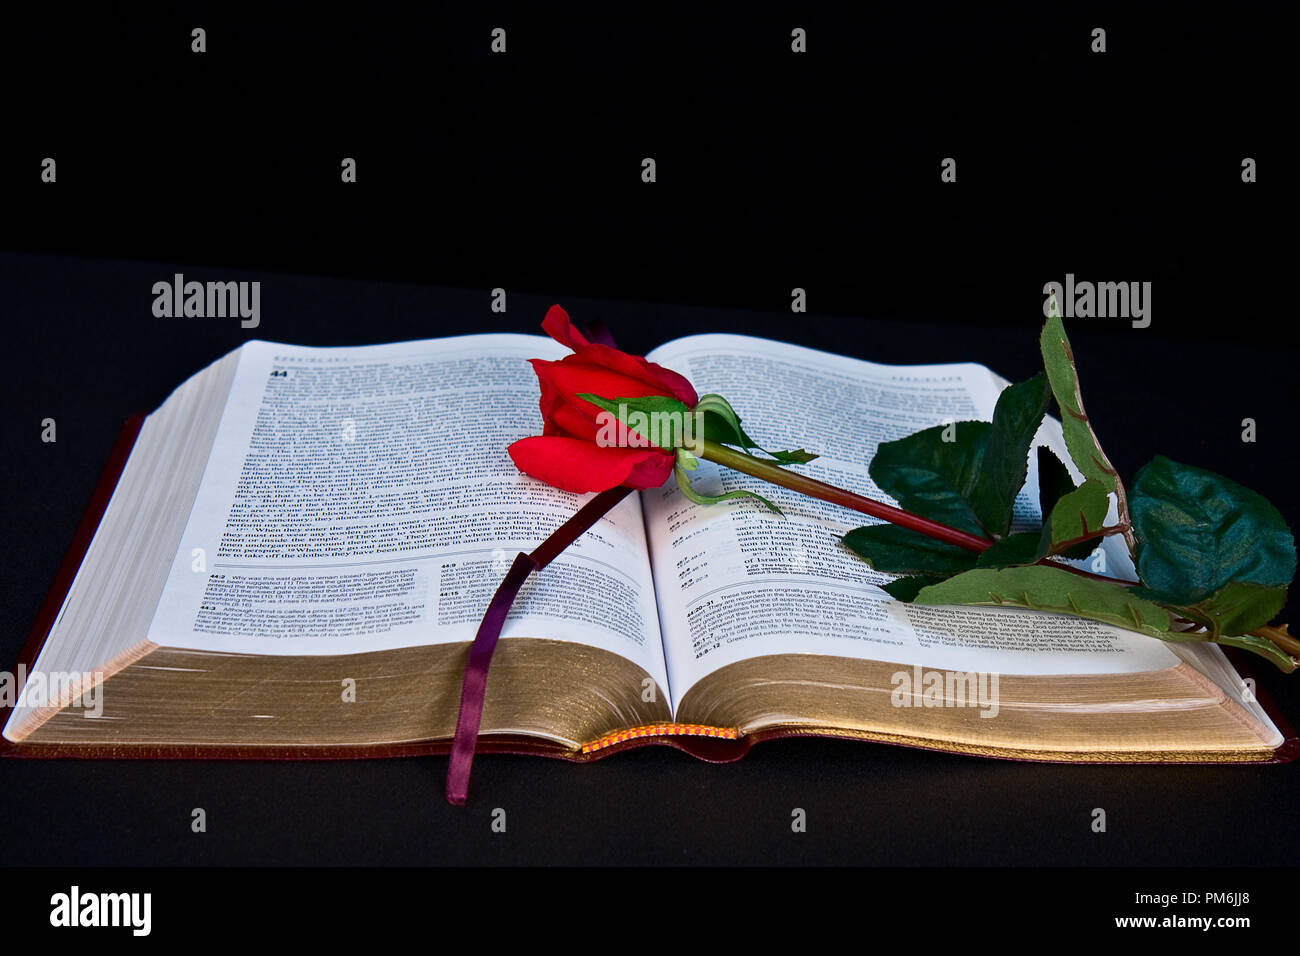 Bible opened up with worn gold on pages isolated on black background, Some images have red rose. Stock Photo